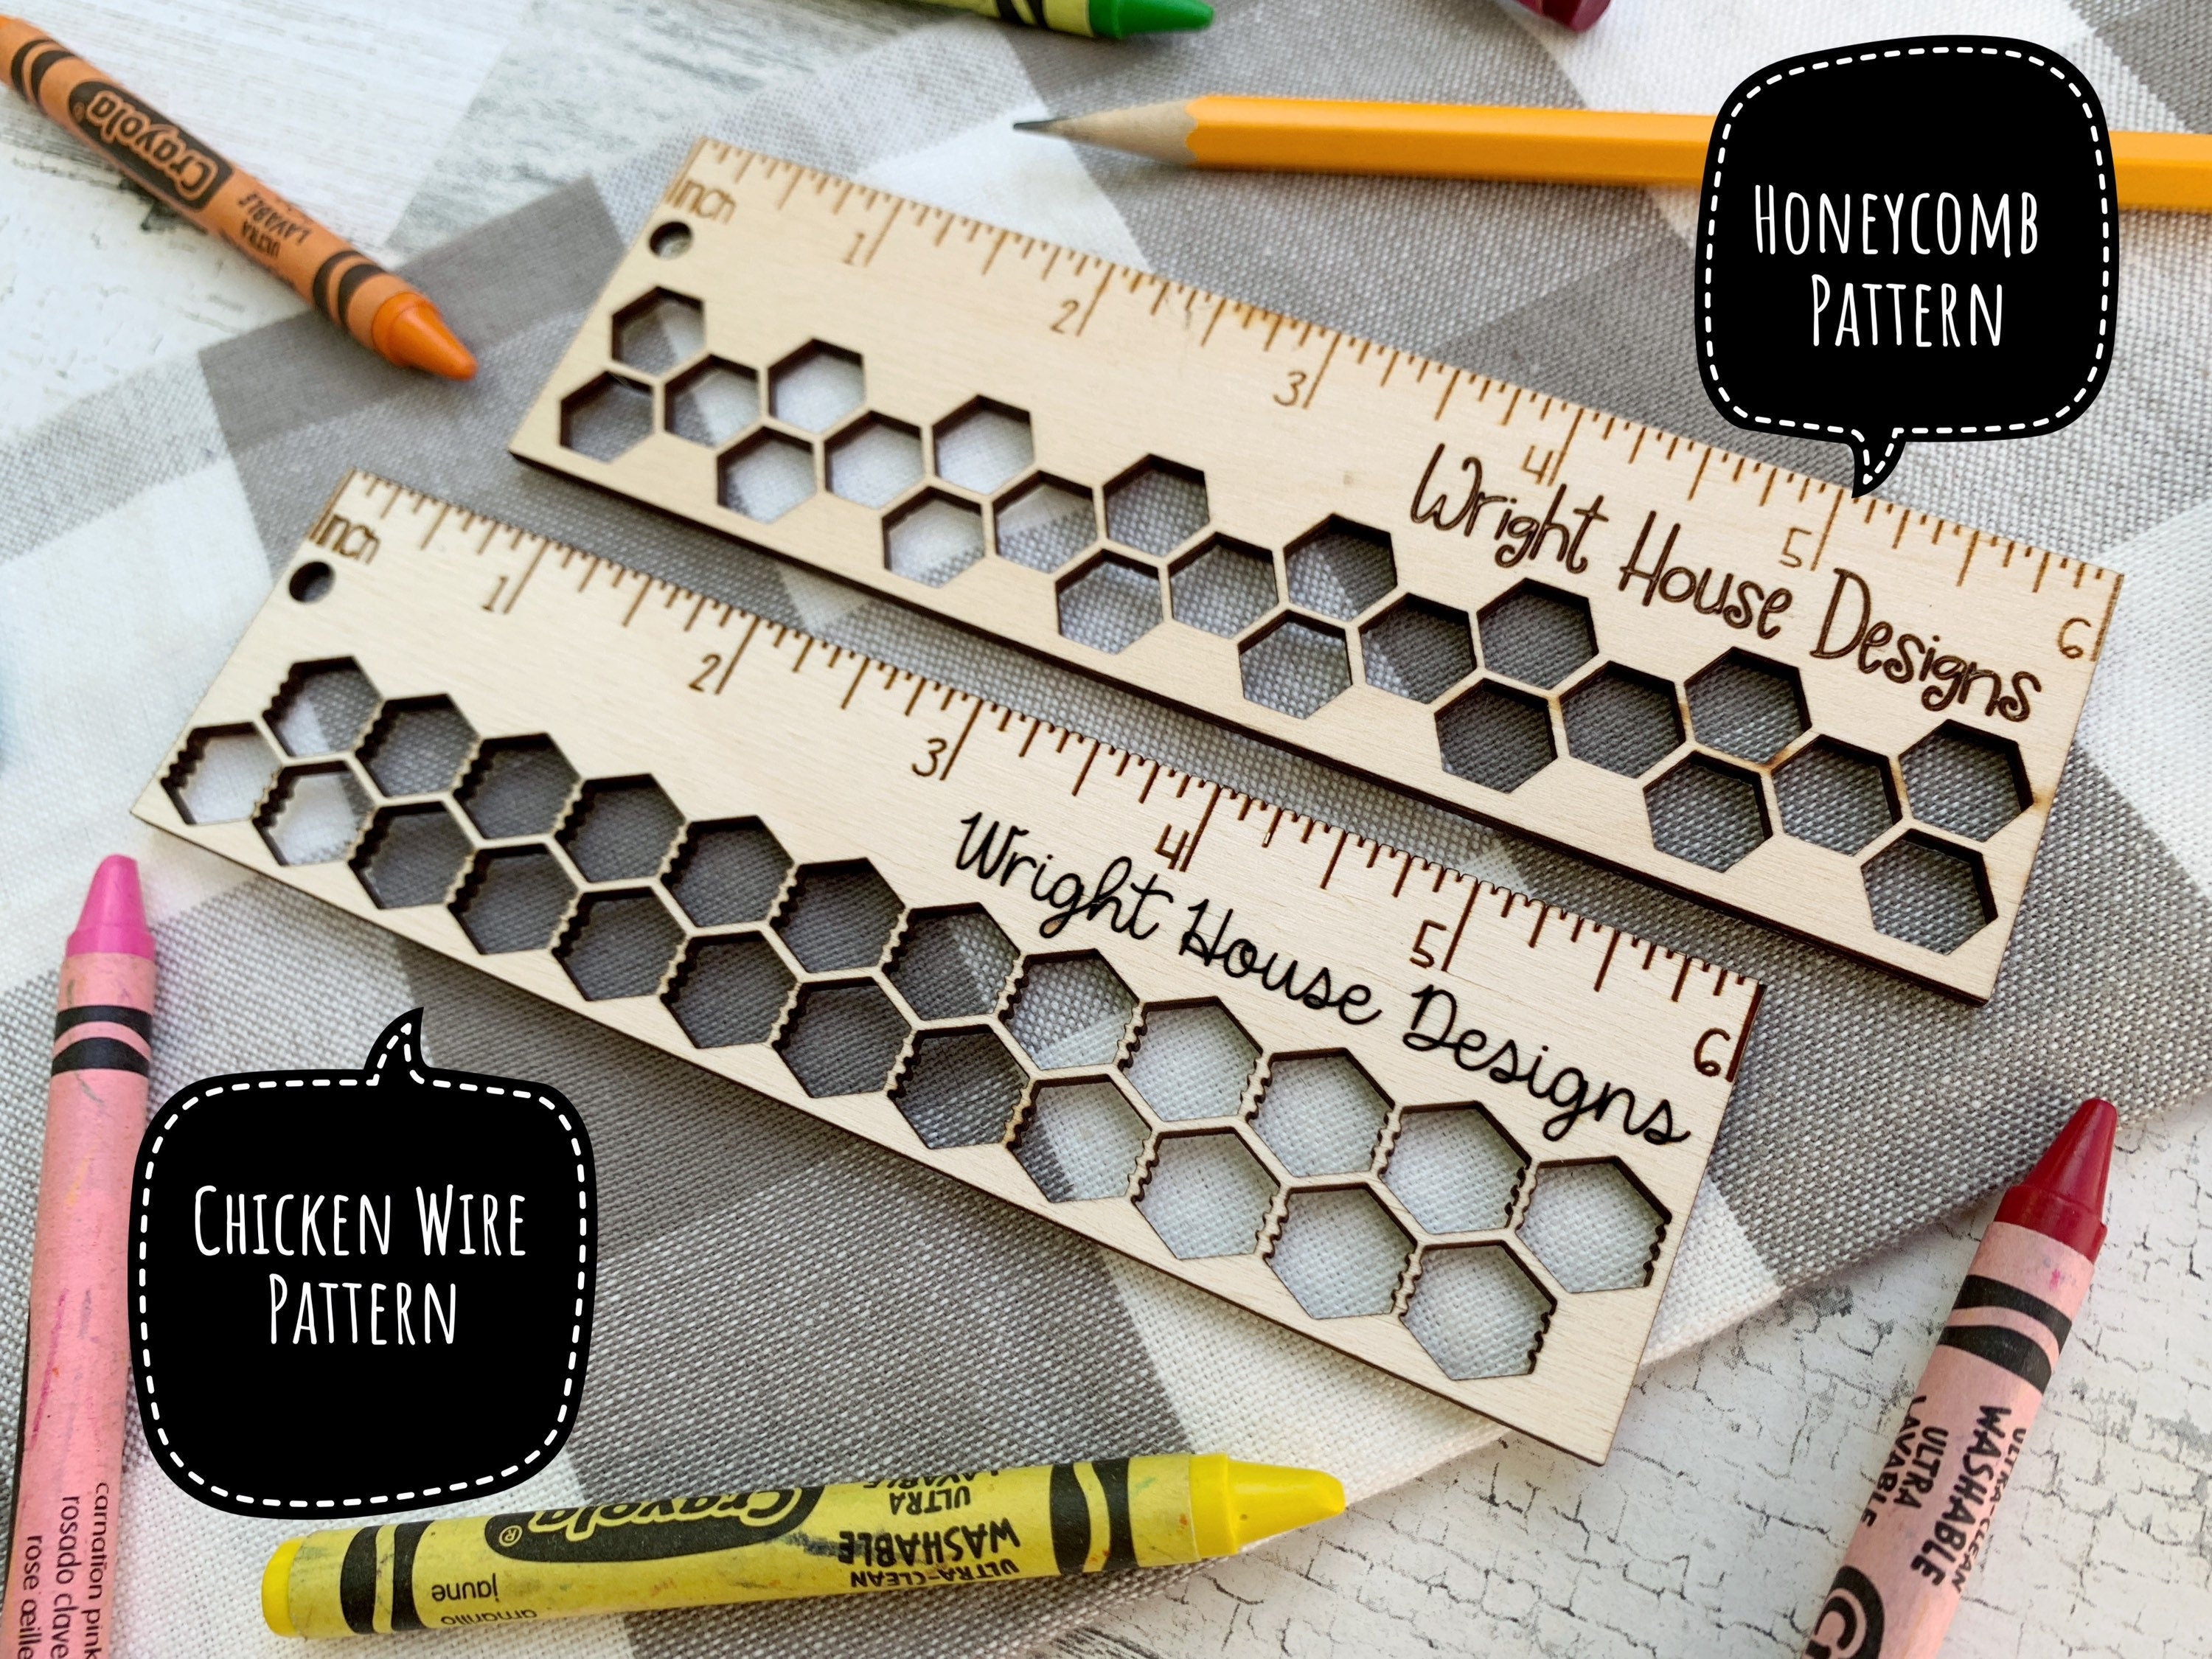 Wood Laser Engraved 6 Inch Ruler - Geometric Pattern - Personalized School and Office Supplies - Custom Monogram Ruler For Kids and Teachers